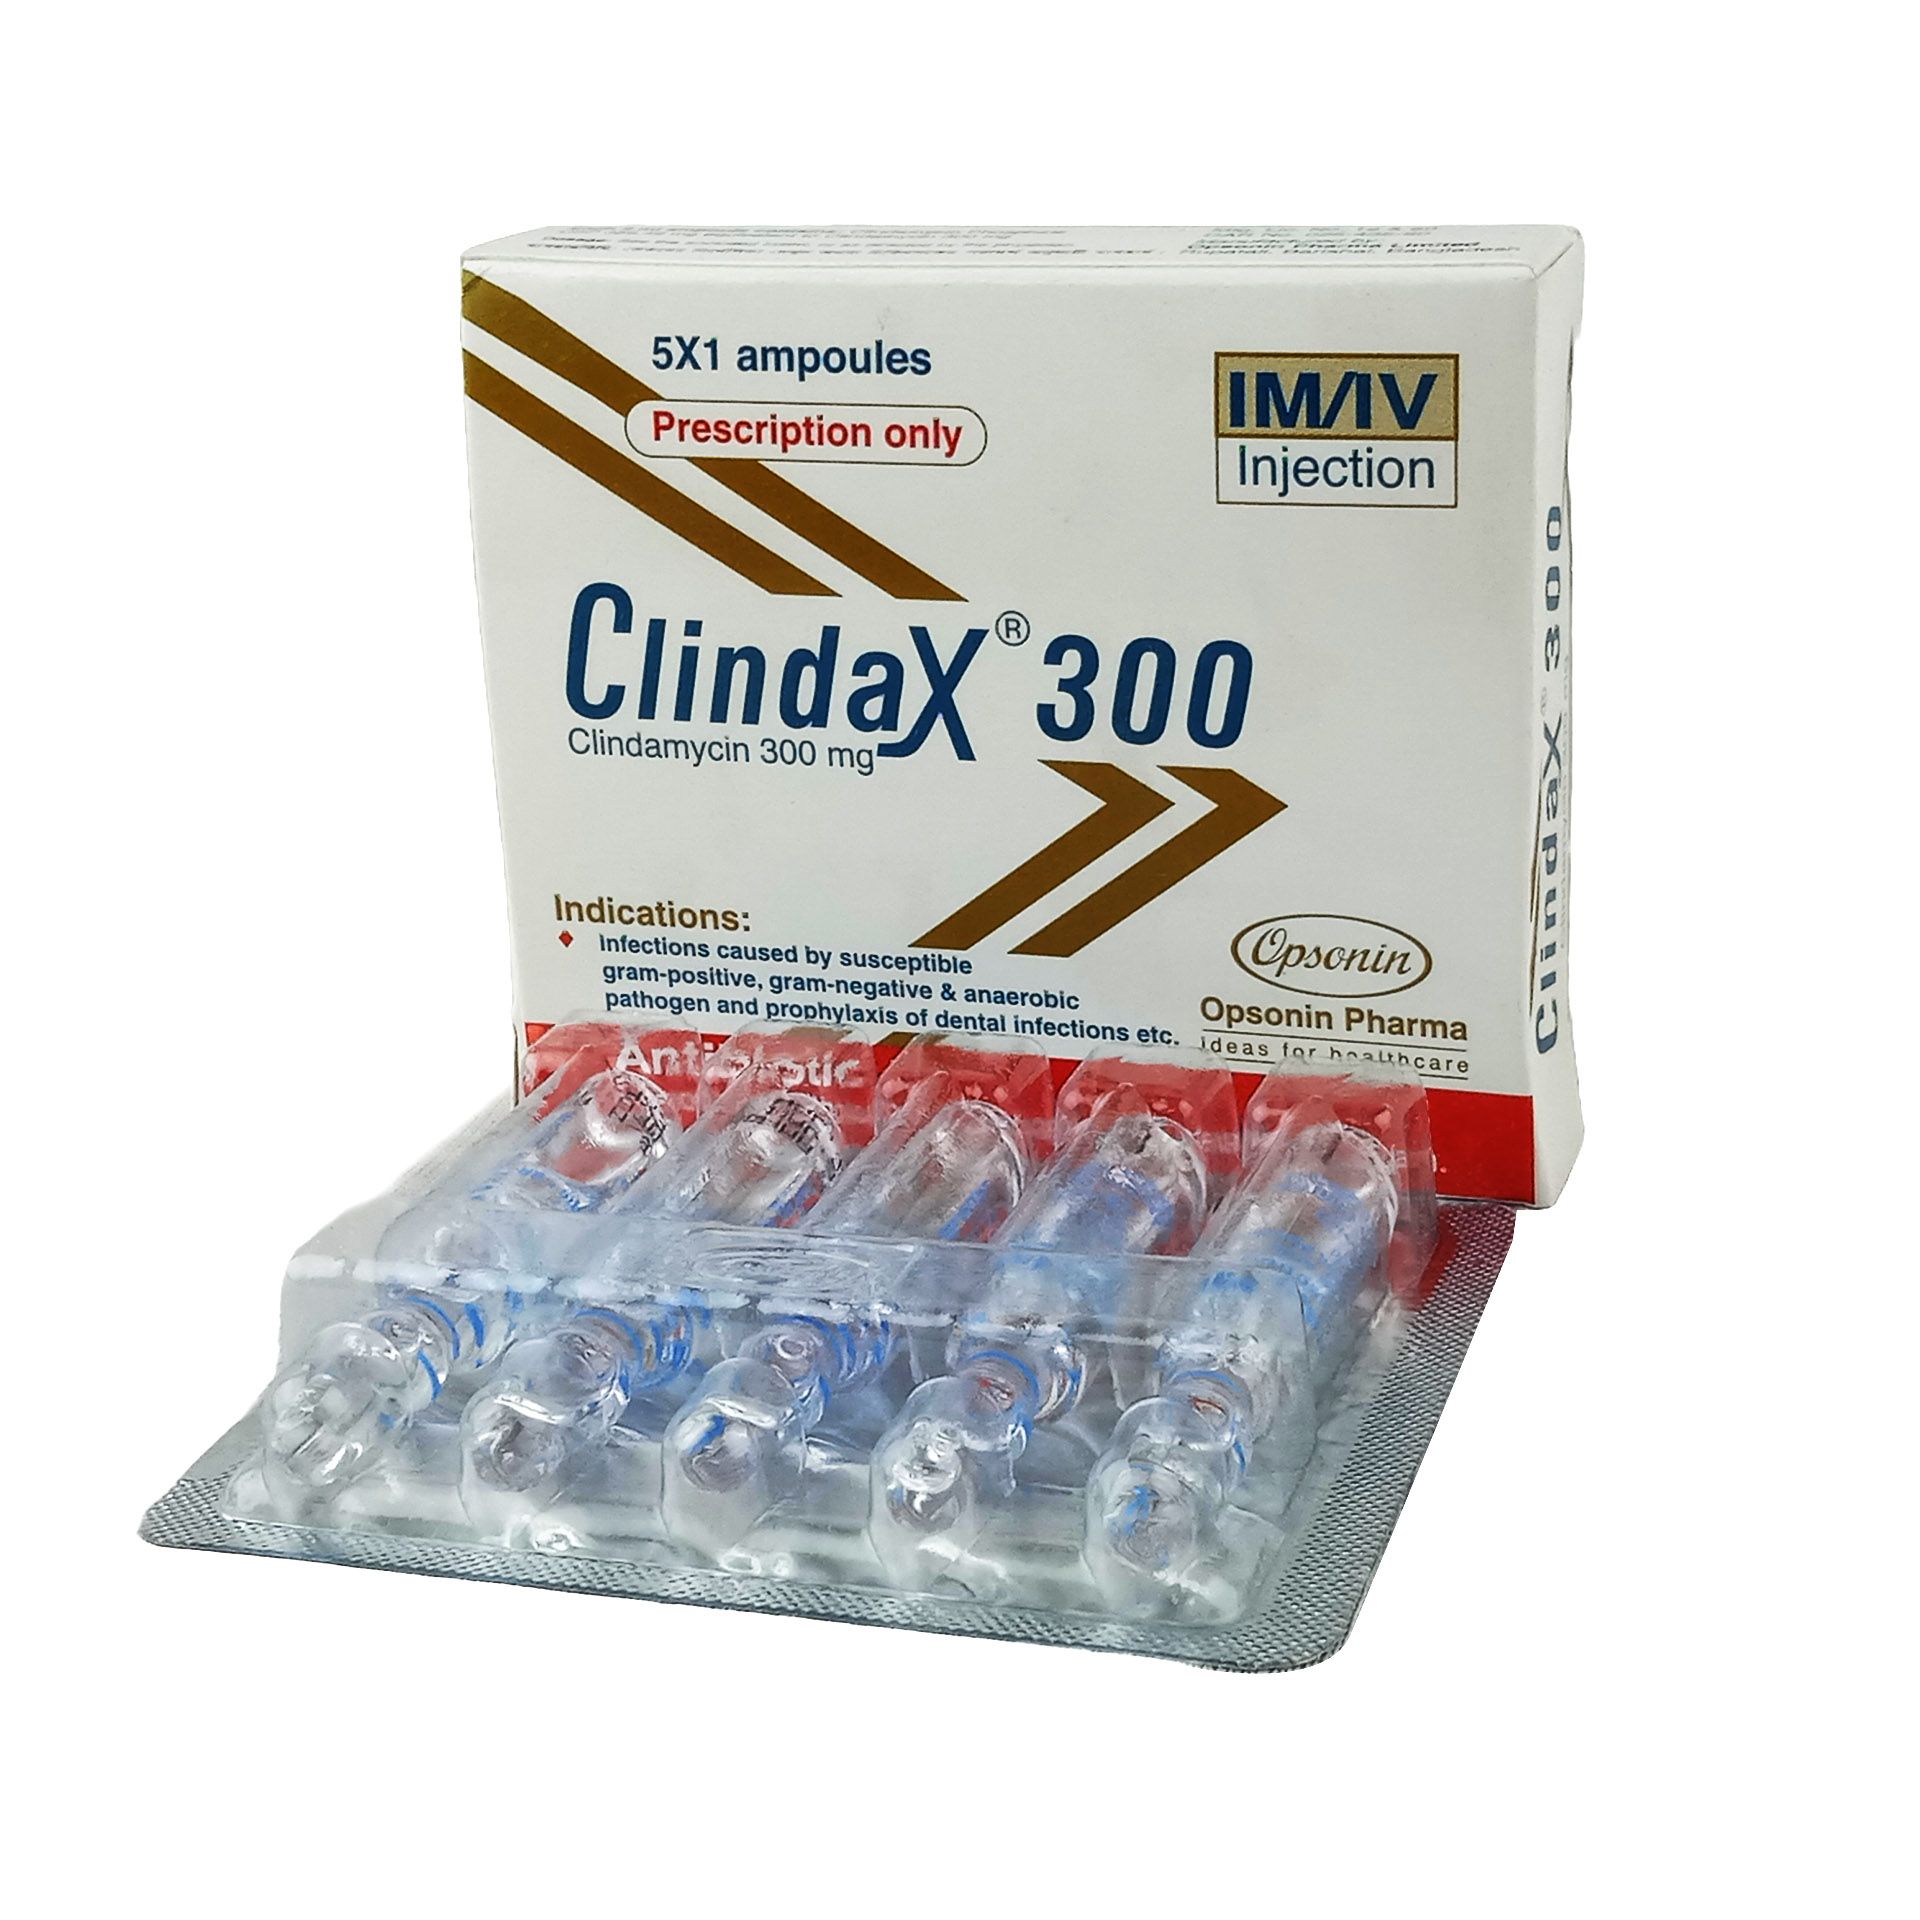 Clindax 300mg/2ml Injection